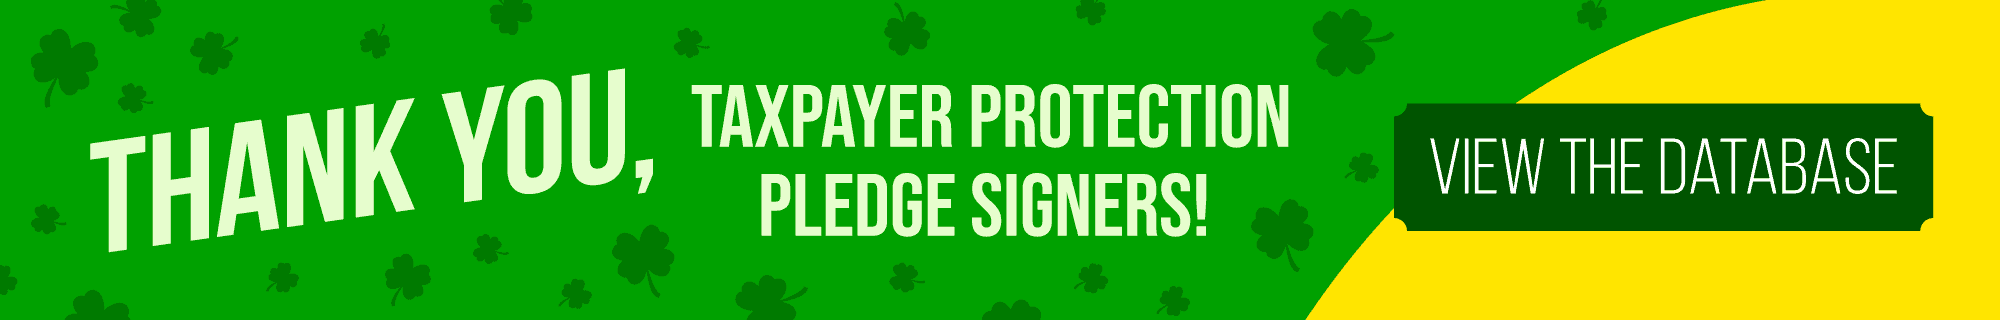 Thank You, Taxpayer Protection Pledge Signers